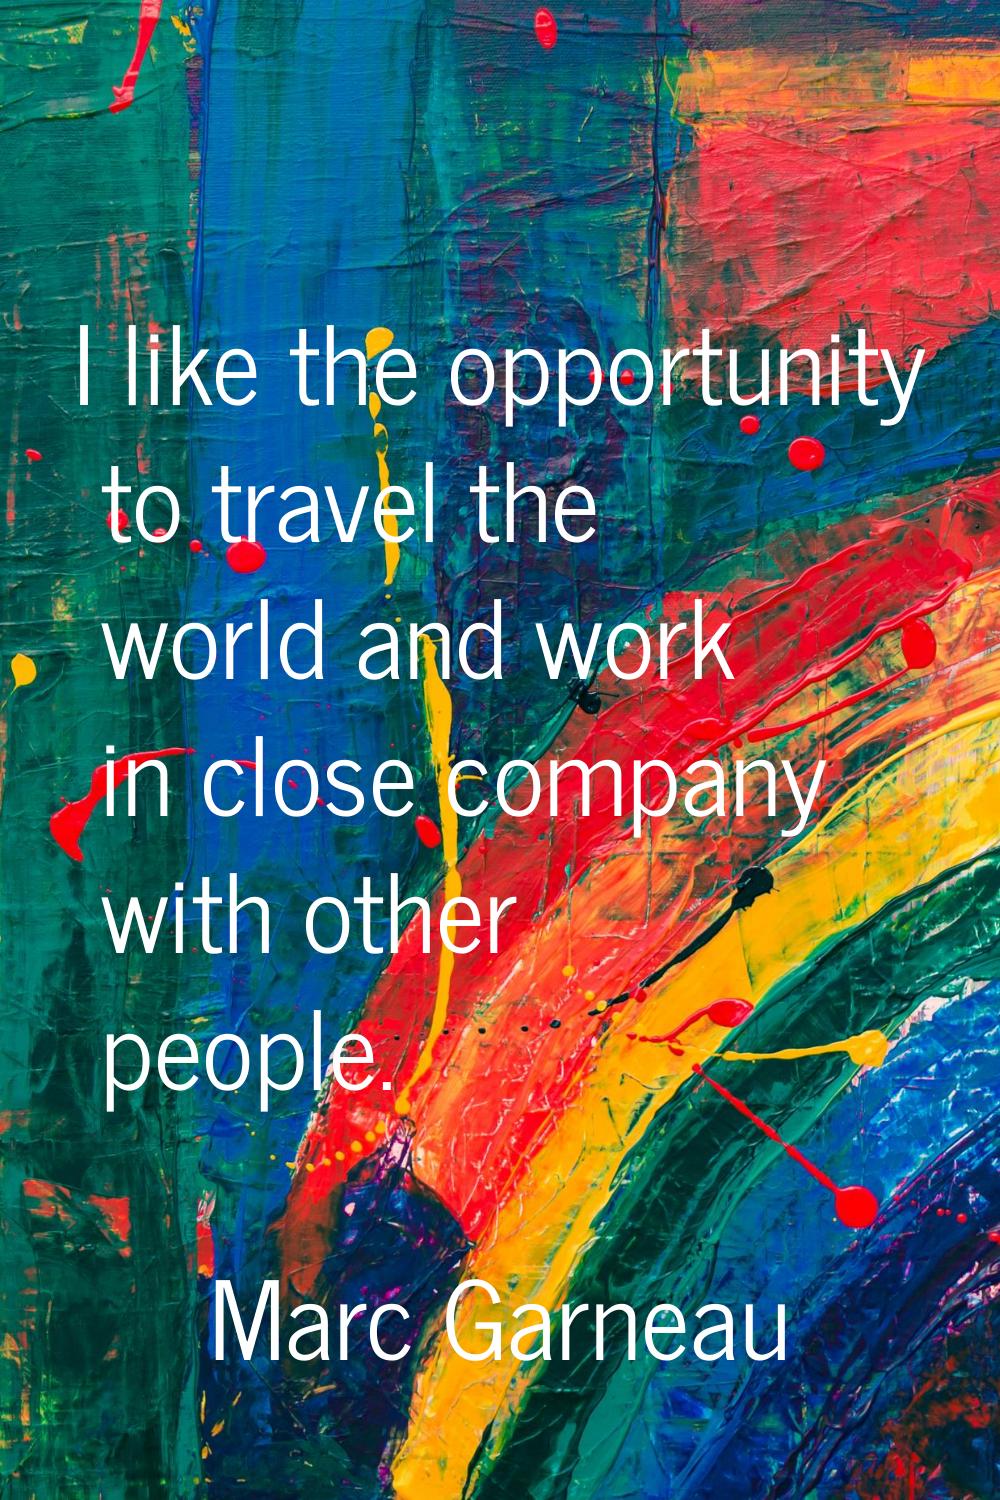 I like the opportunity to travel the world and work in close company with other people.